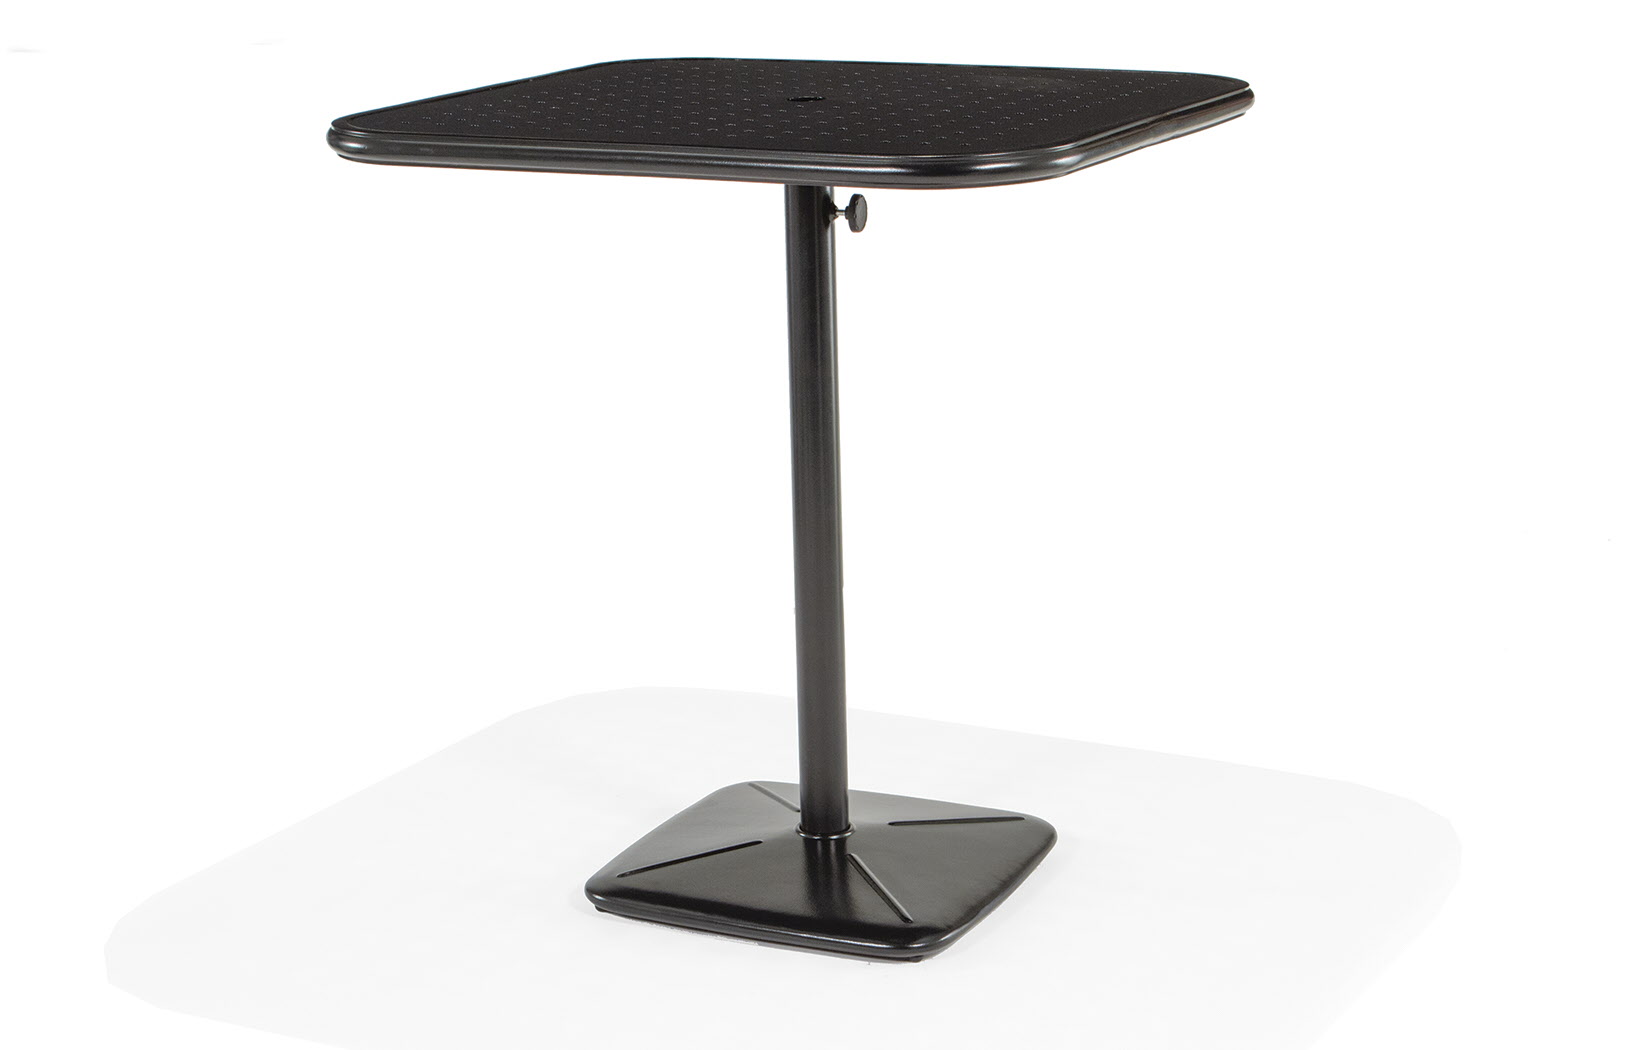 Stamped Aluminum Top 36 Inch Square Bar Table